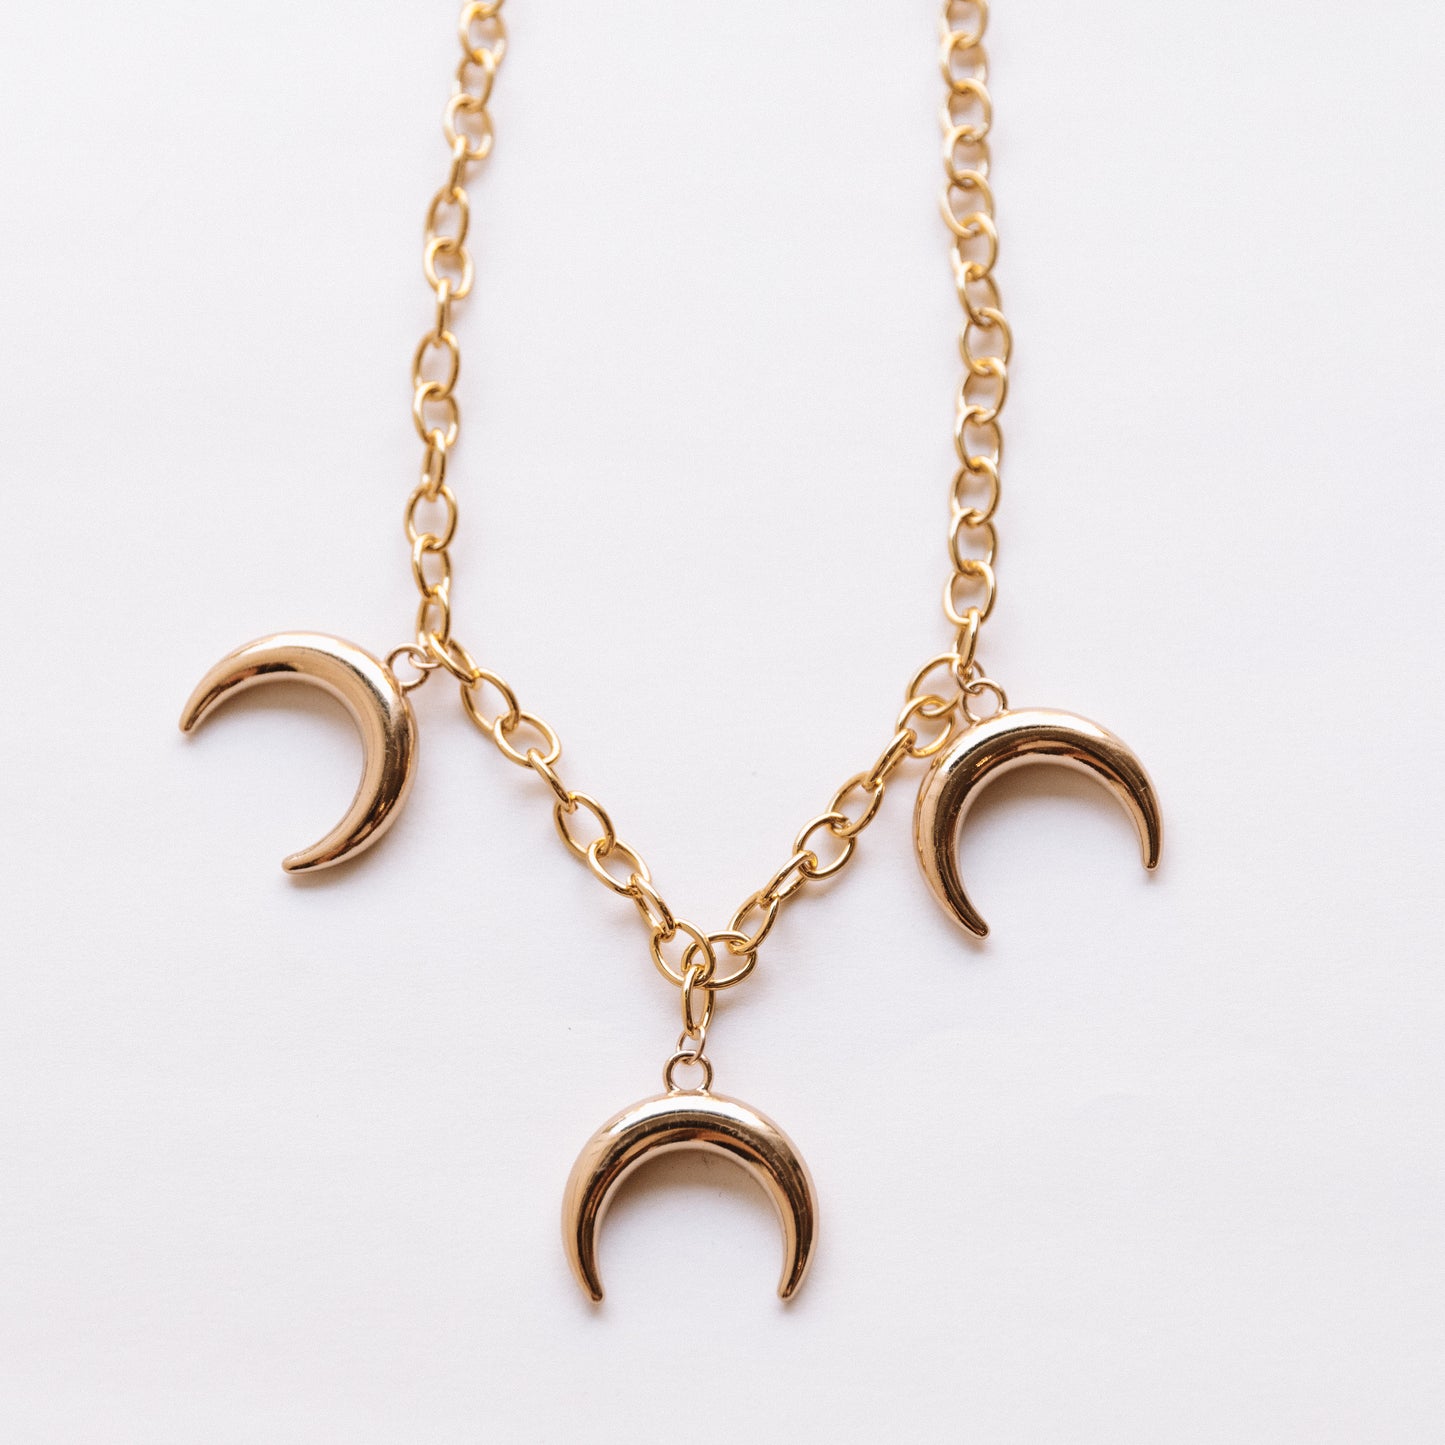 The Triple Horn Necklace